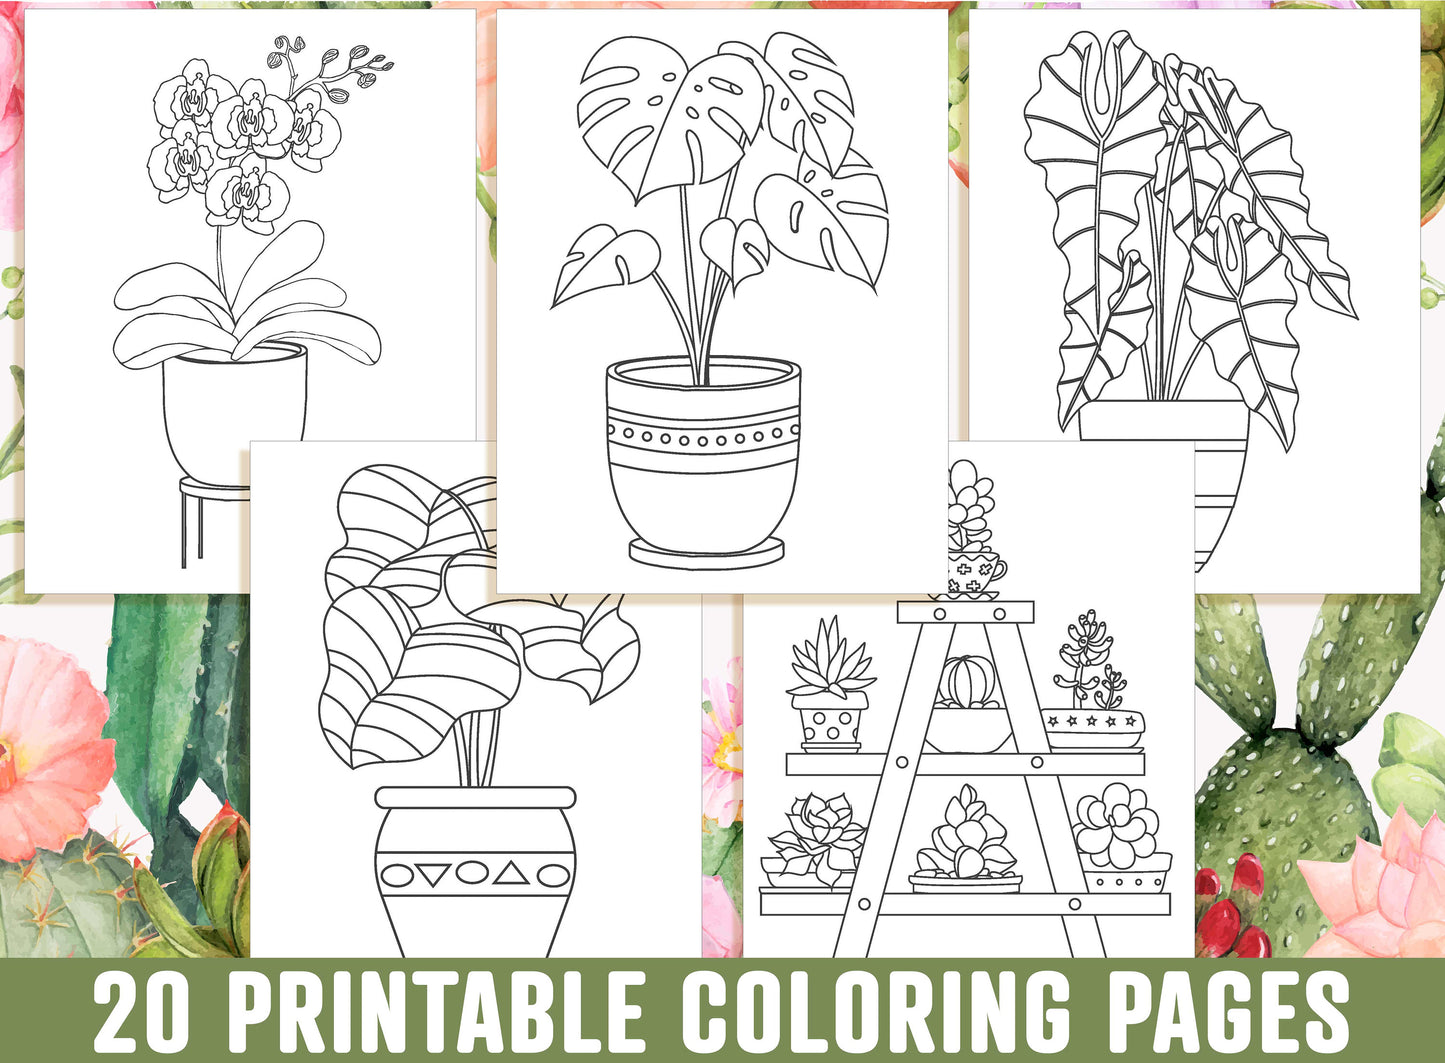 Houseplant Coloring Pages, 20 Printable Adorable Succulent, Cactus, Houseplant Coloring Pages, Indoor Plant Coloring Book, Instant Download